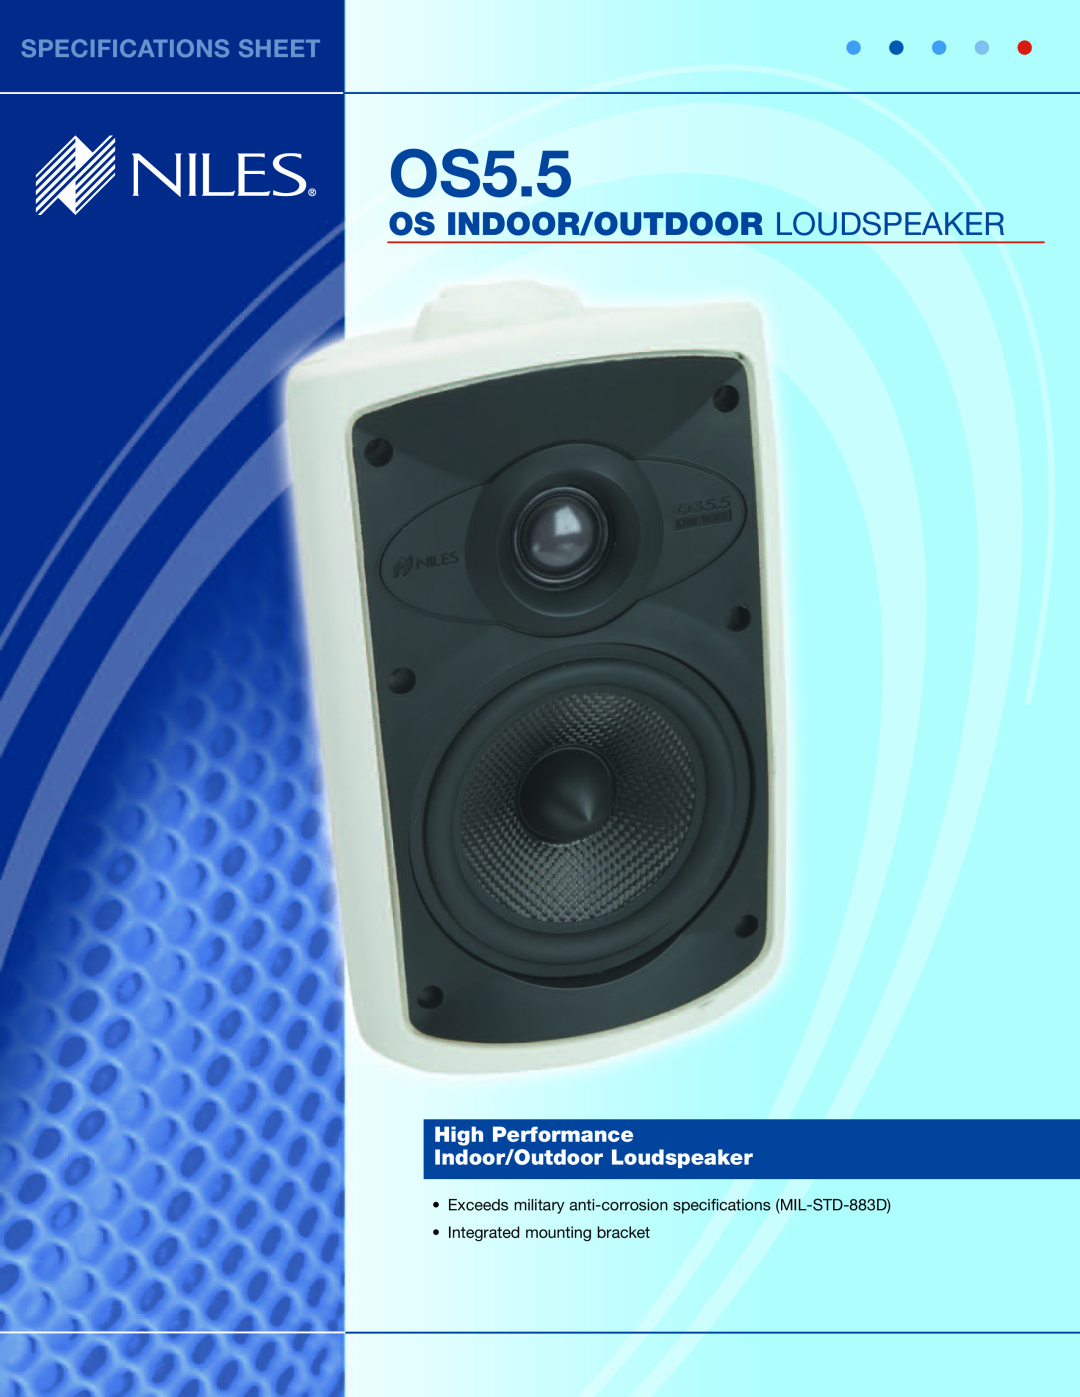 Niles Audio OS5.5 specifications Os Indoor/Outdoor Loudspeaker, Specifications Sheet 